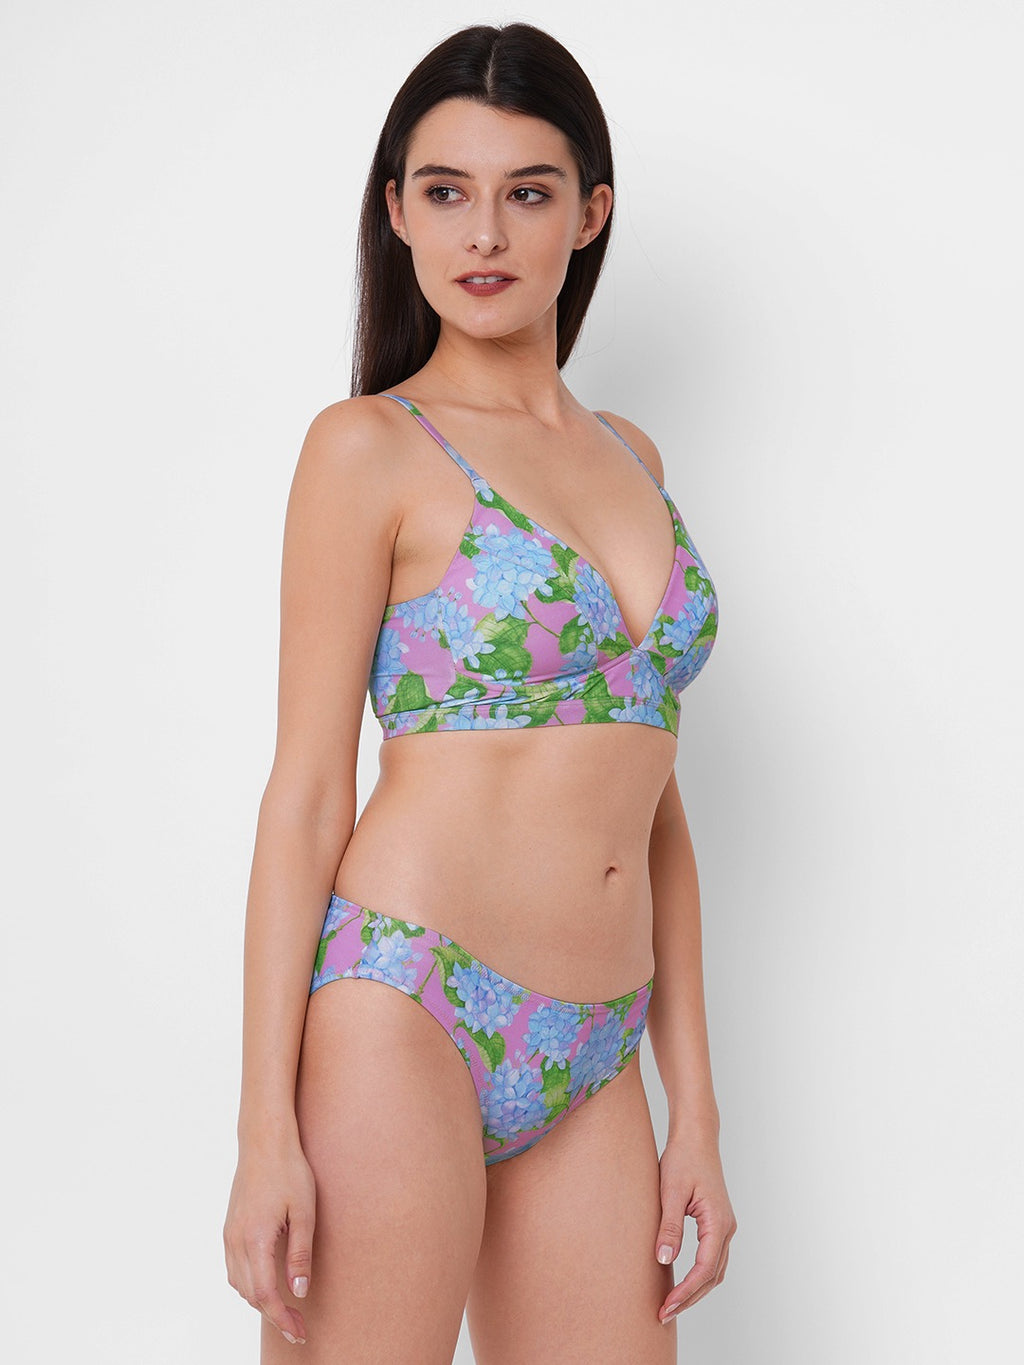 Shop Bikini Sets At Cheap Prices Online in India The Beach Company - online swimwear shop